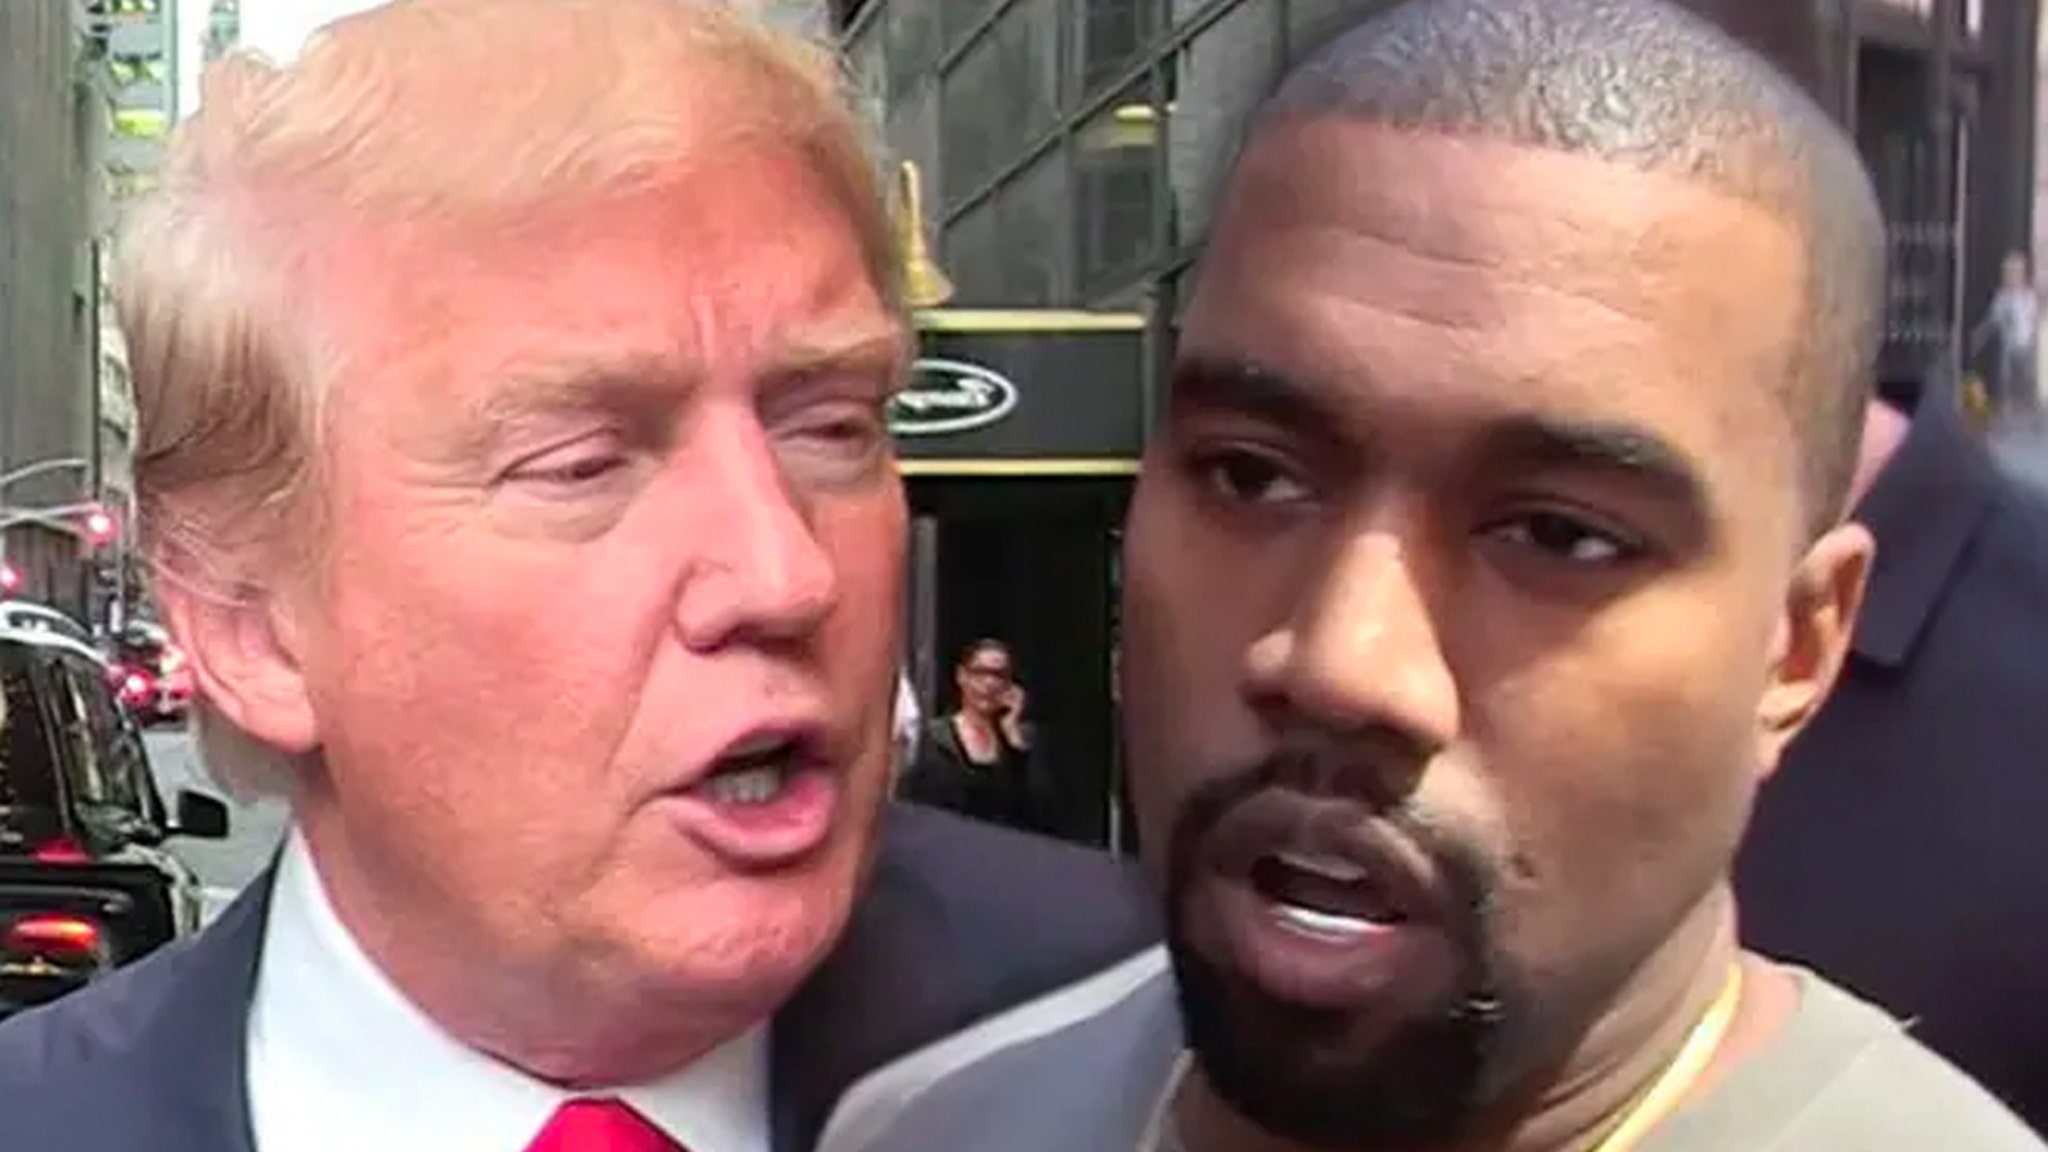 Donald Trump Blasts Kanye West Over Meeting With Nick Fuentes